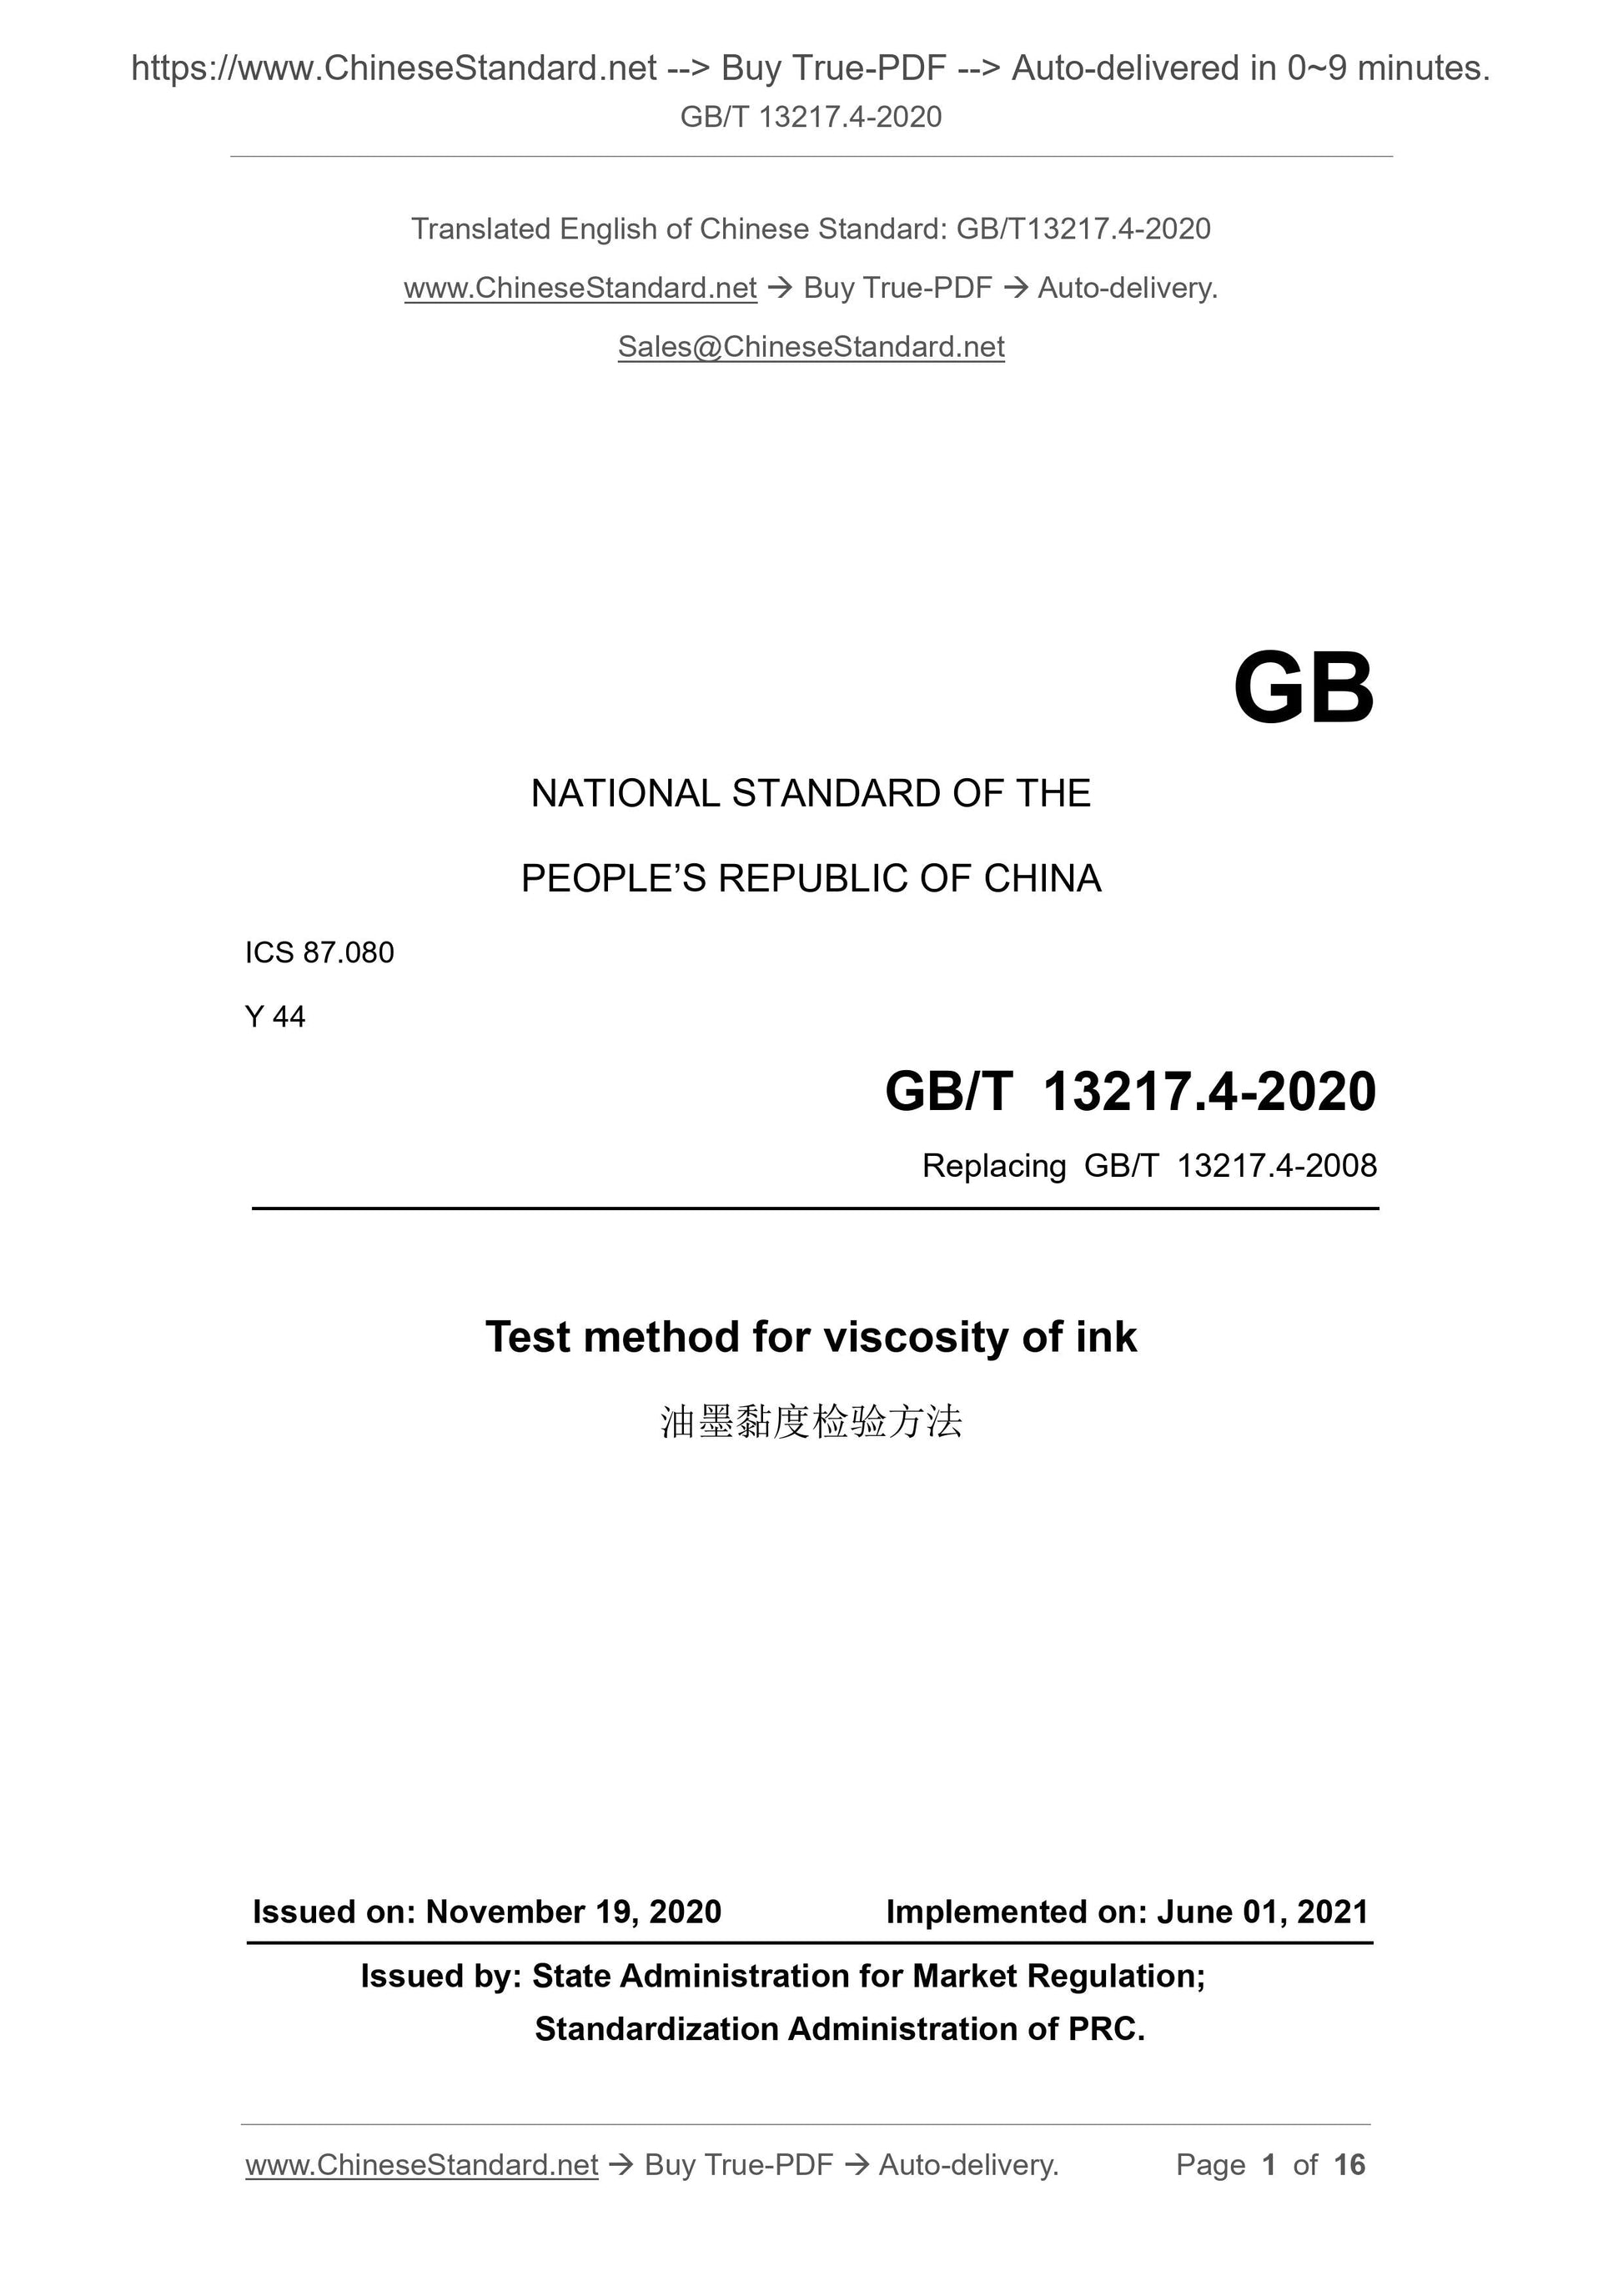 GB/T 13217.4-2020 Page 1